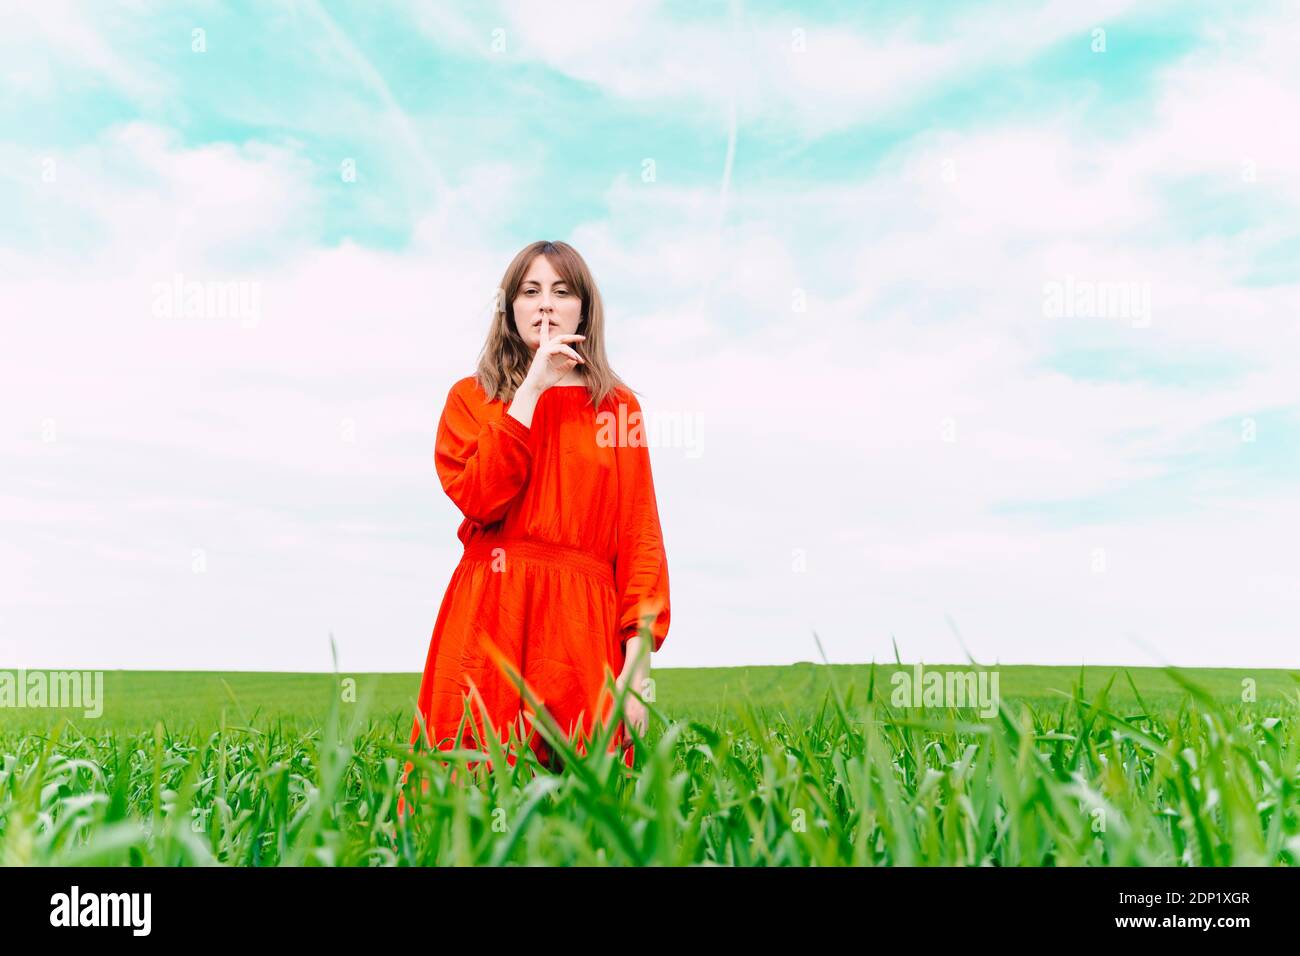 Portrait of woman wearing red dress standing in a field with finger on mouth Stock Photo